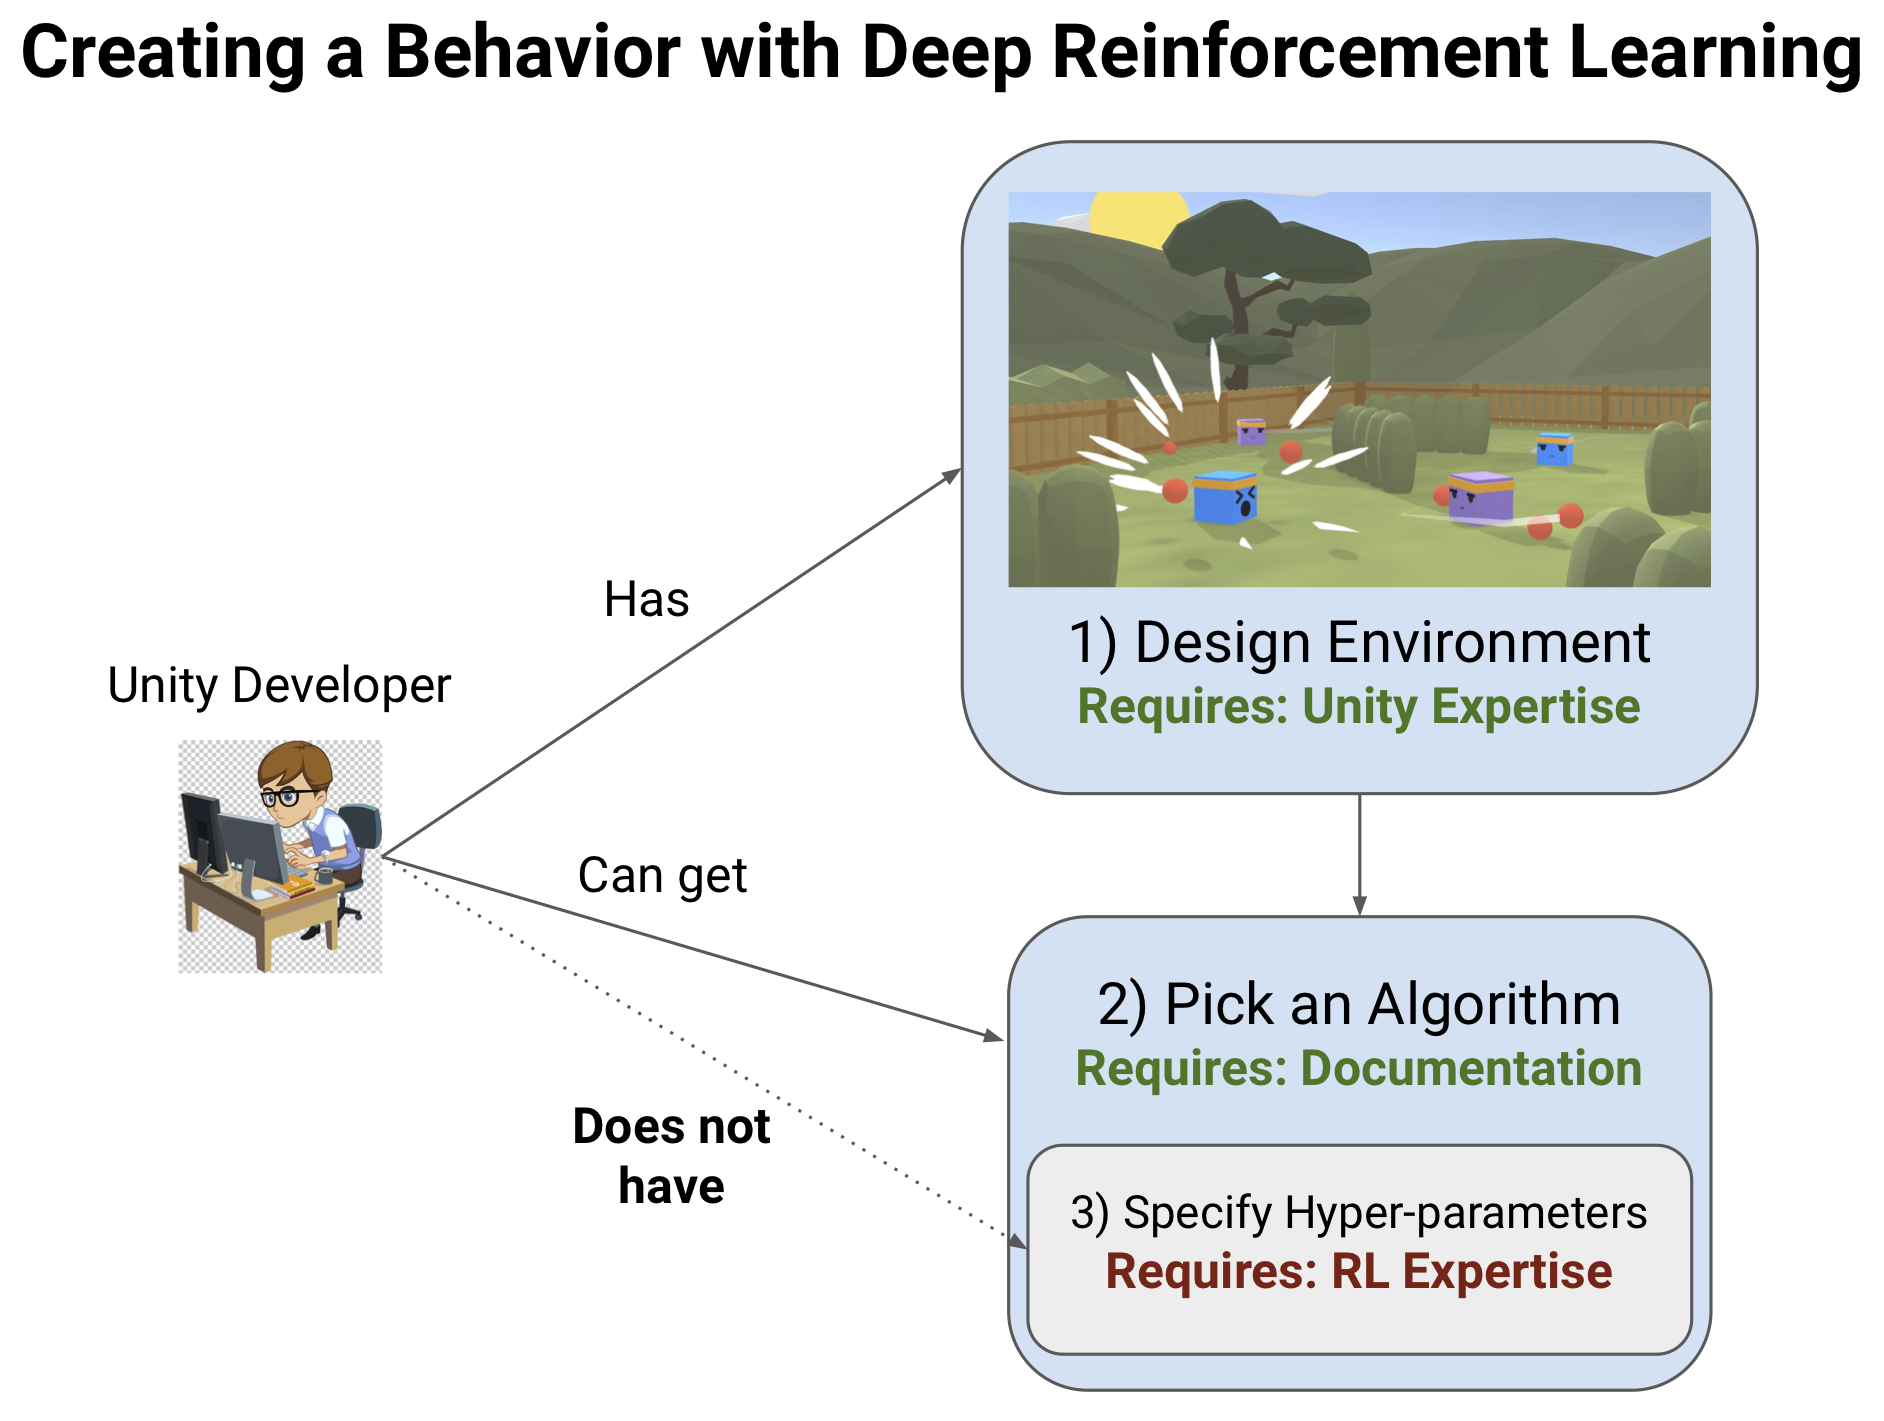 diagram showing how to create a behavior with deep reinforcement learning